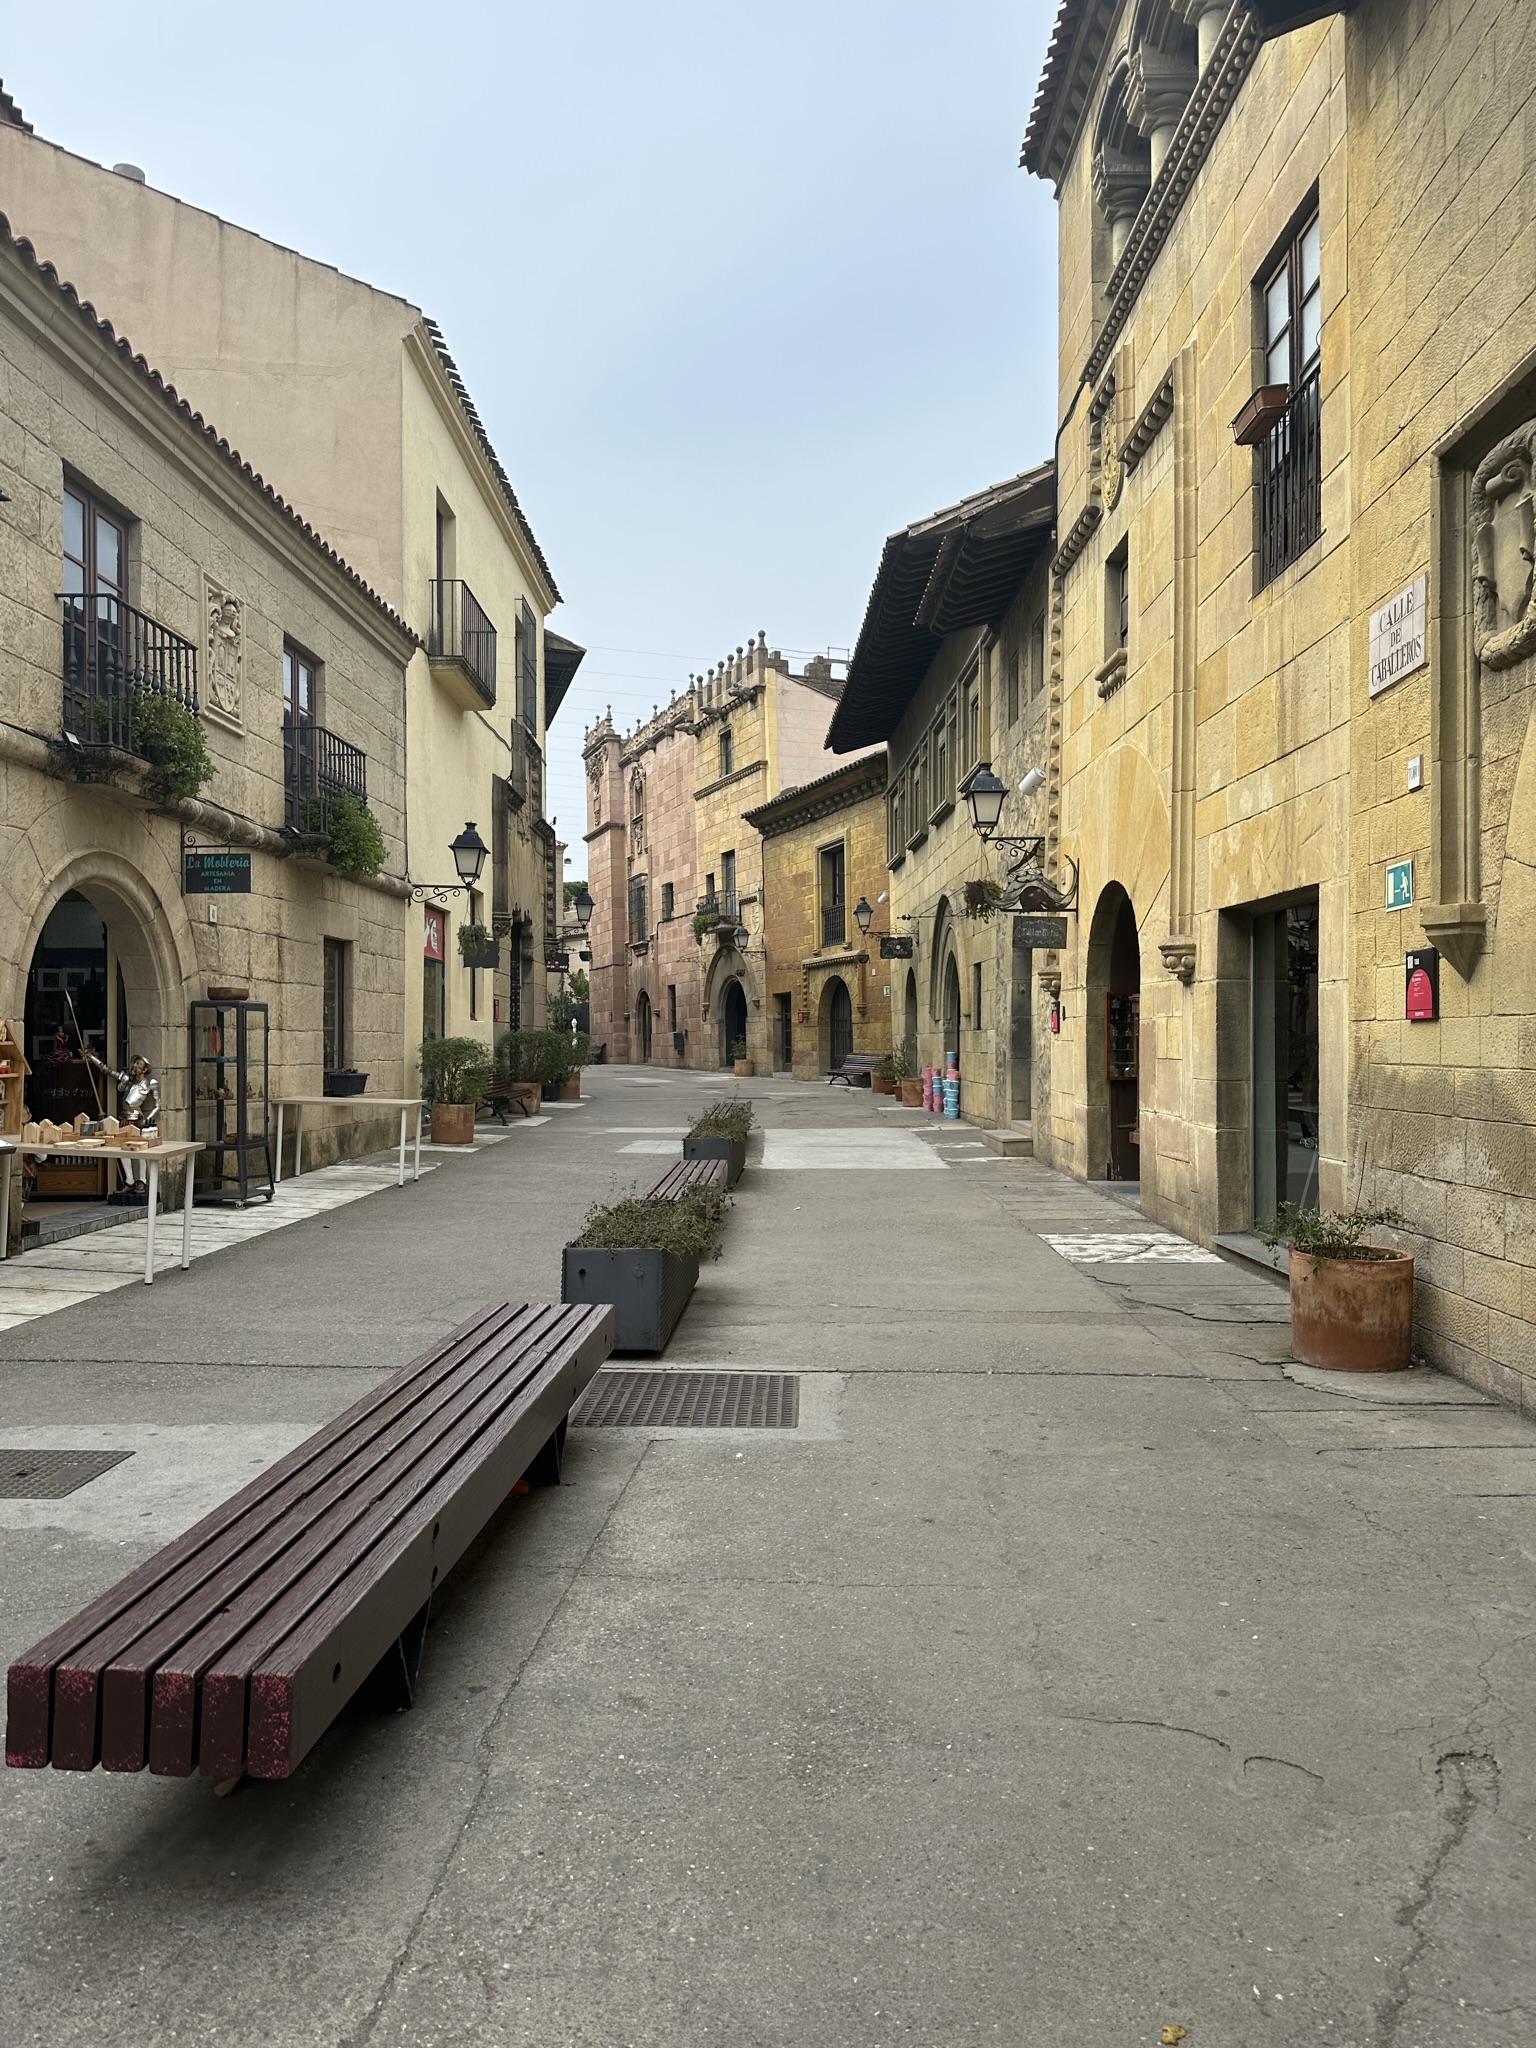 Poble Espanyol is an open-air architecture museum filled with activities and many corners to explore